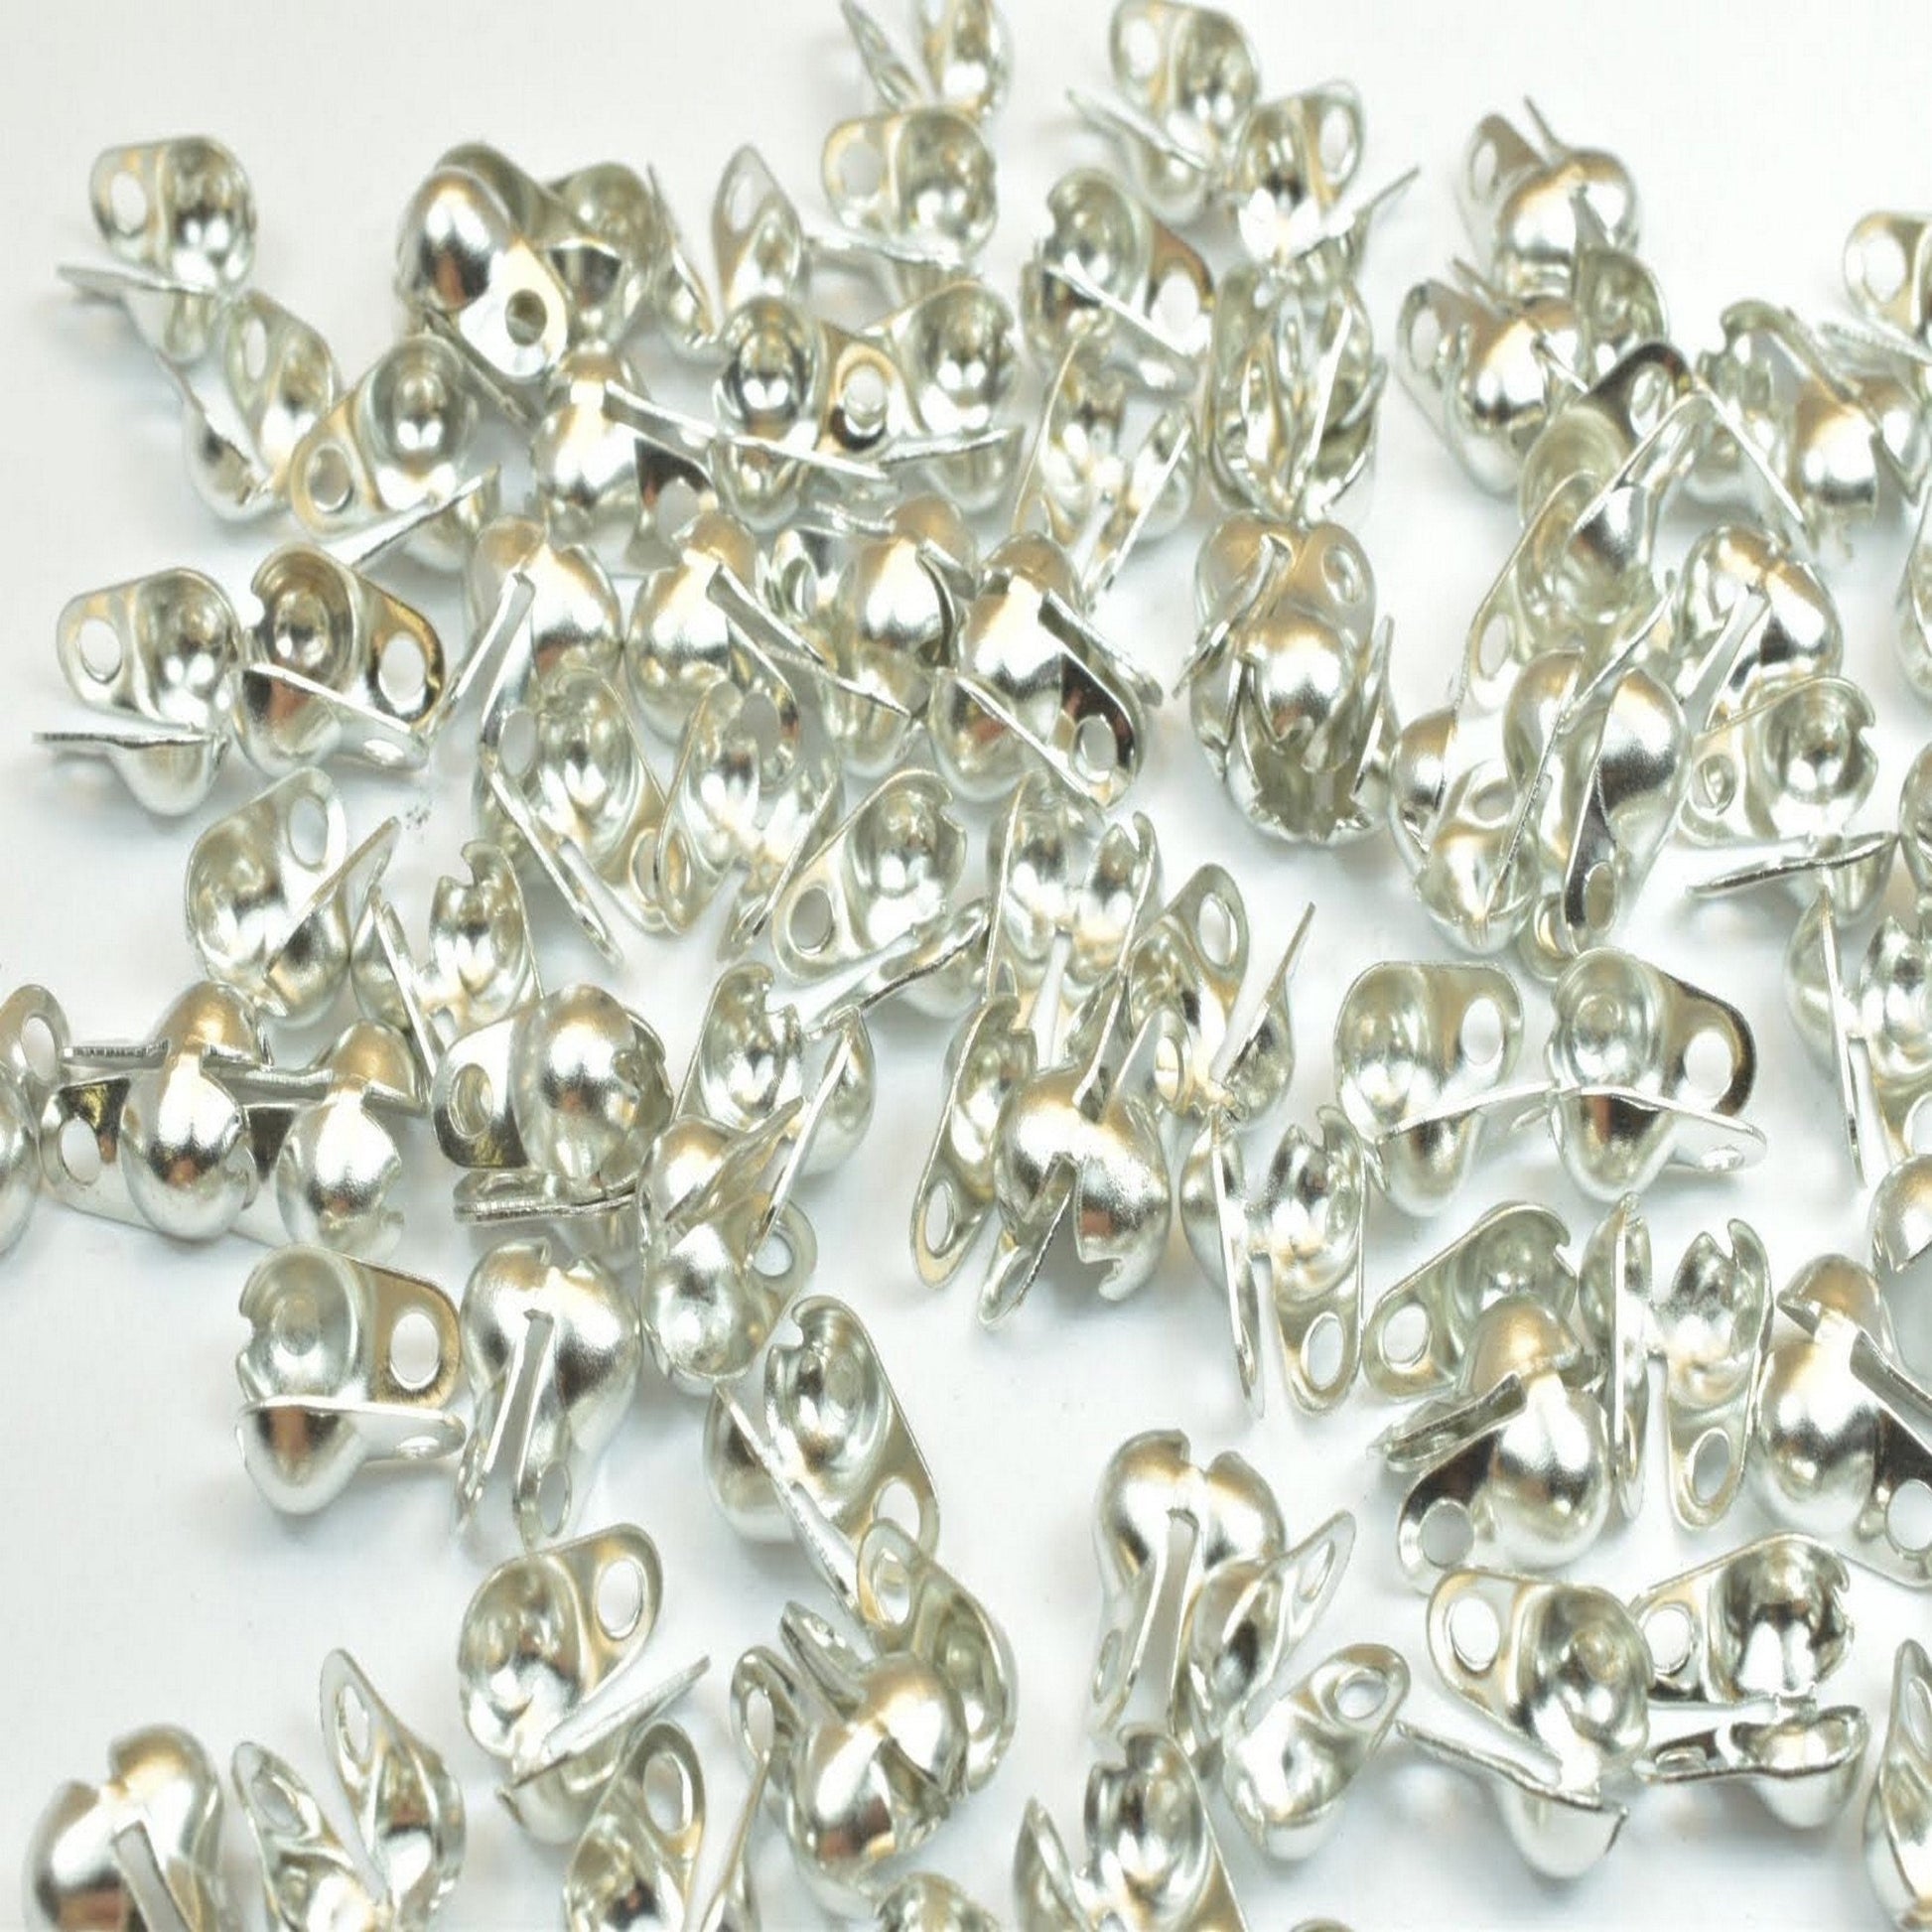 Ball chain crimp cover end tip beads size 1.5mm, 2.4mm, 3.2mm, 4mm for